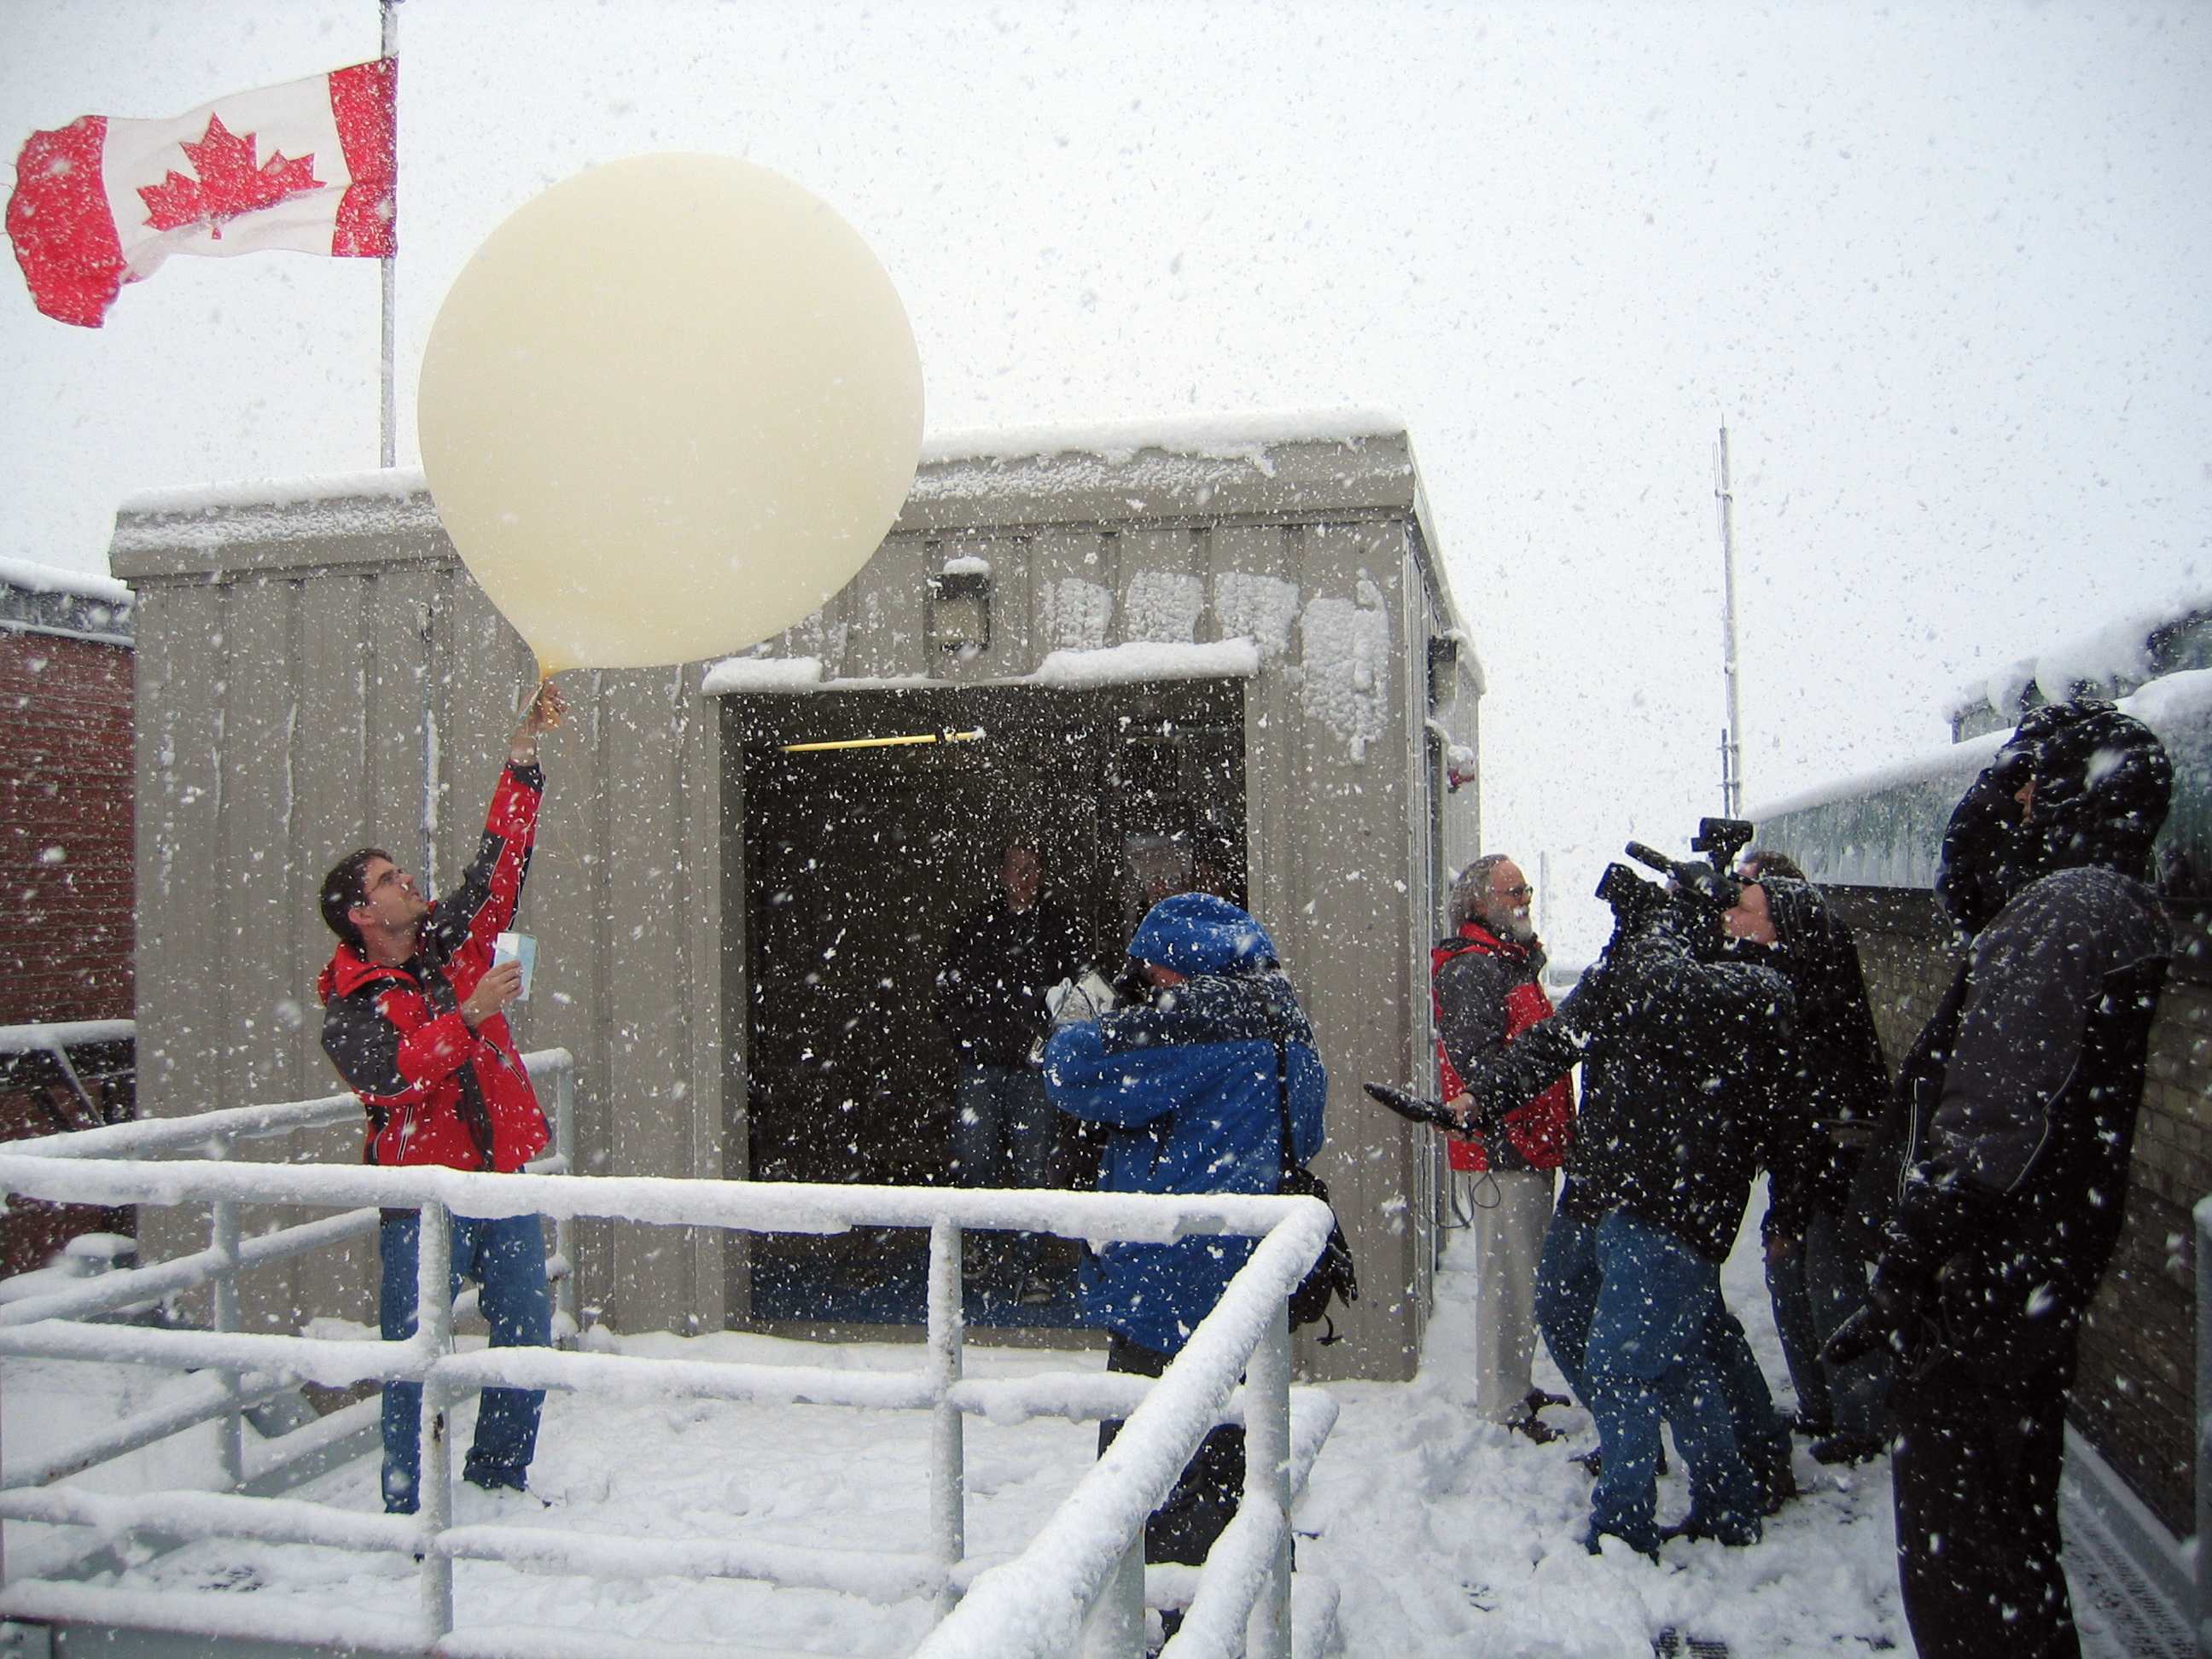 Launching a weather balloon into the storm